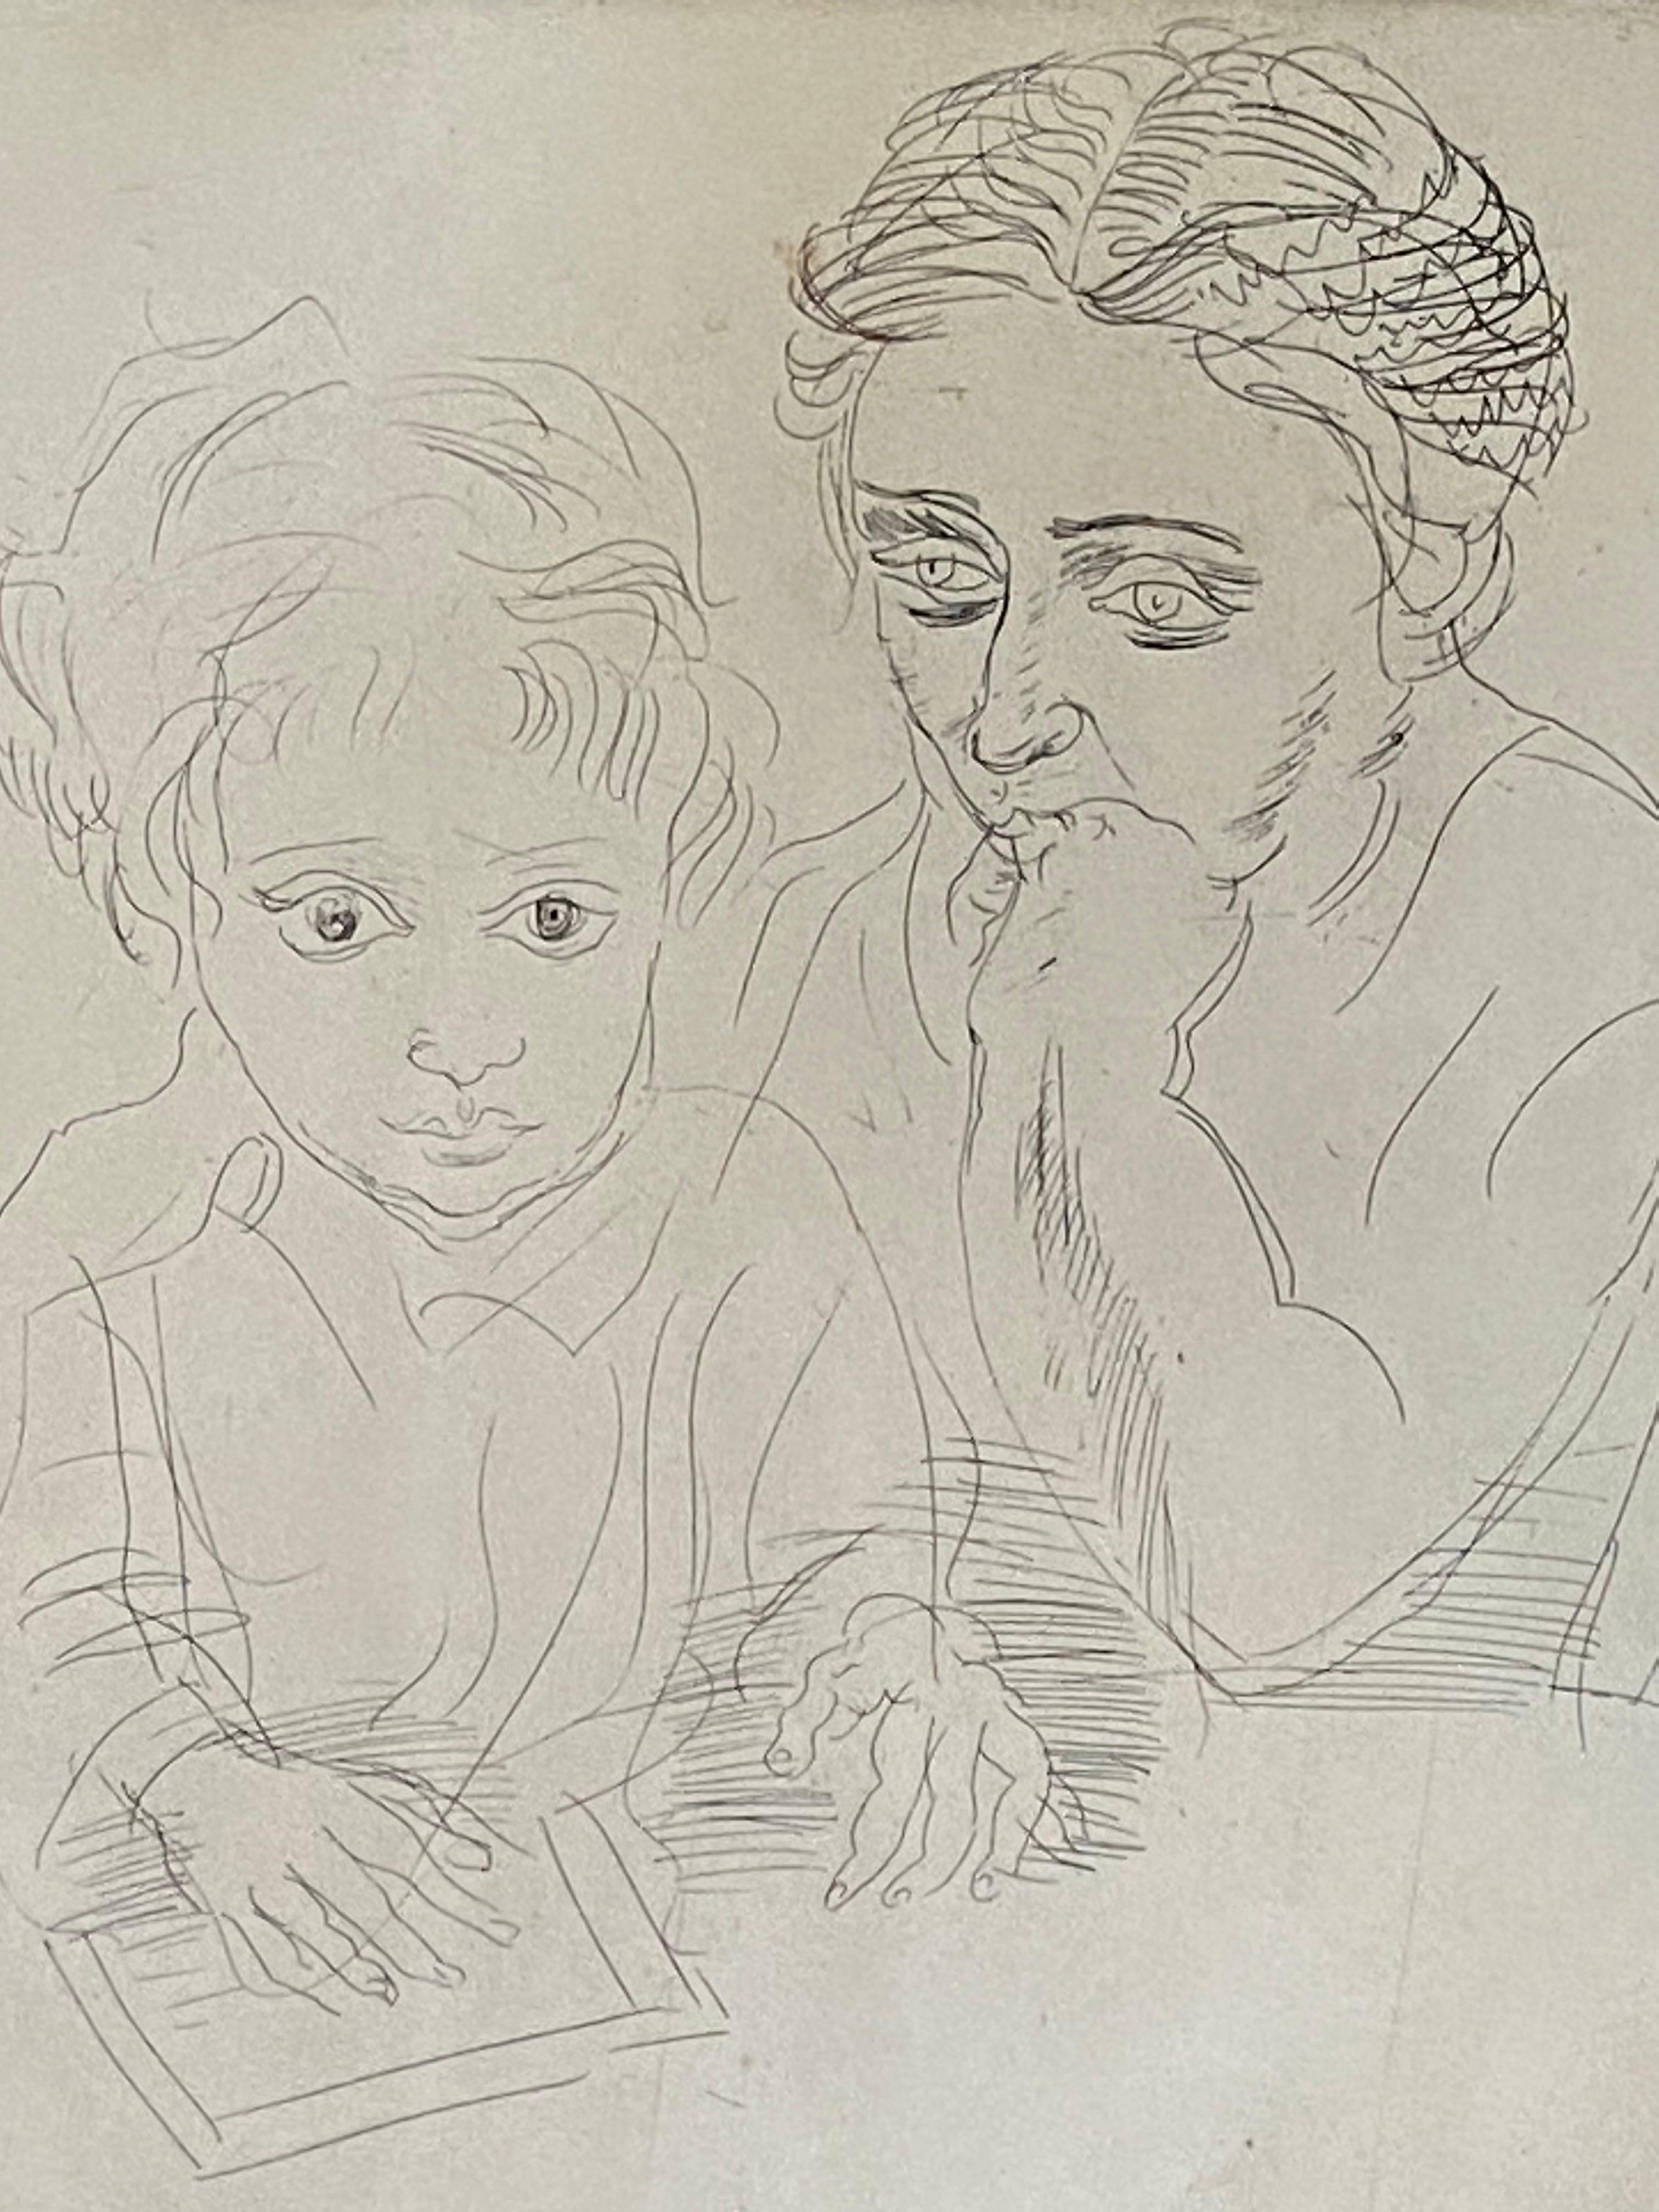 Mother and Child etching done after Raoul Dufy. Limited edition of 50 only.  Not dated.  Condition is excellent.  Image size is 12.5 by 11 inches.  Sheet  size is 18.25 by 15 inches.  Nicely gallery framed.  Overall framed measurements are 26 by